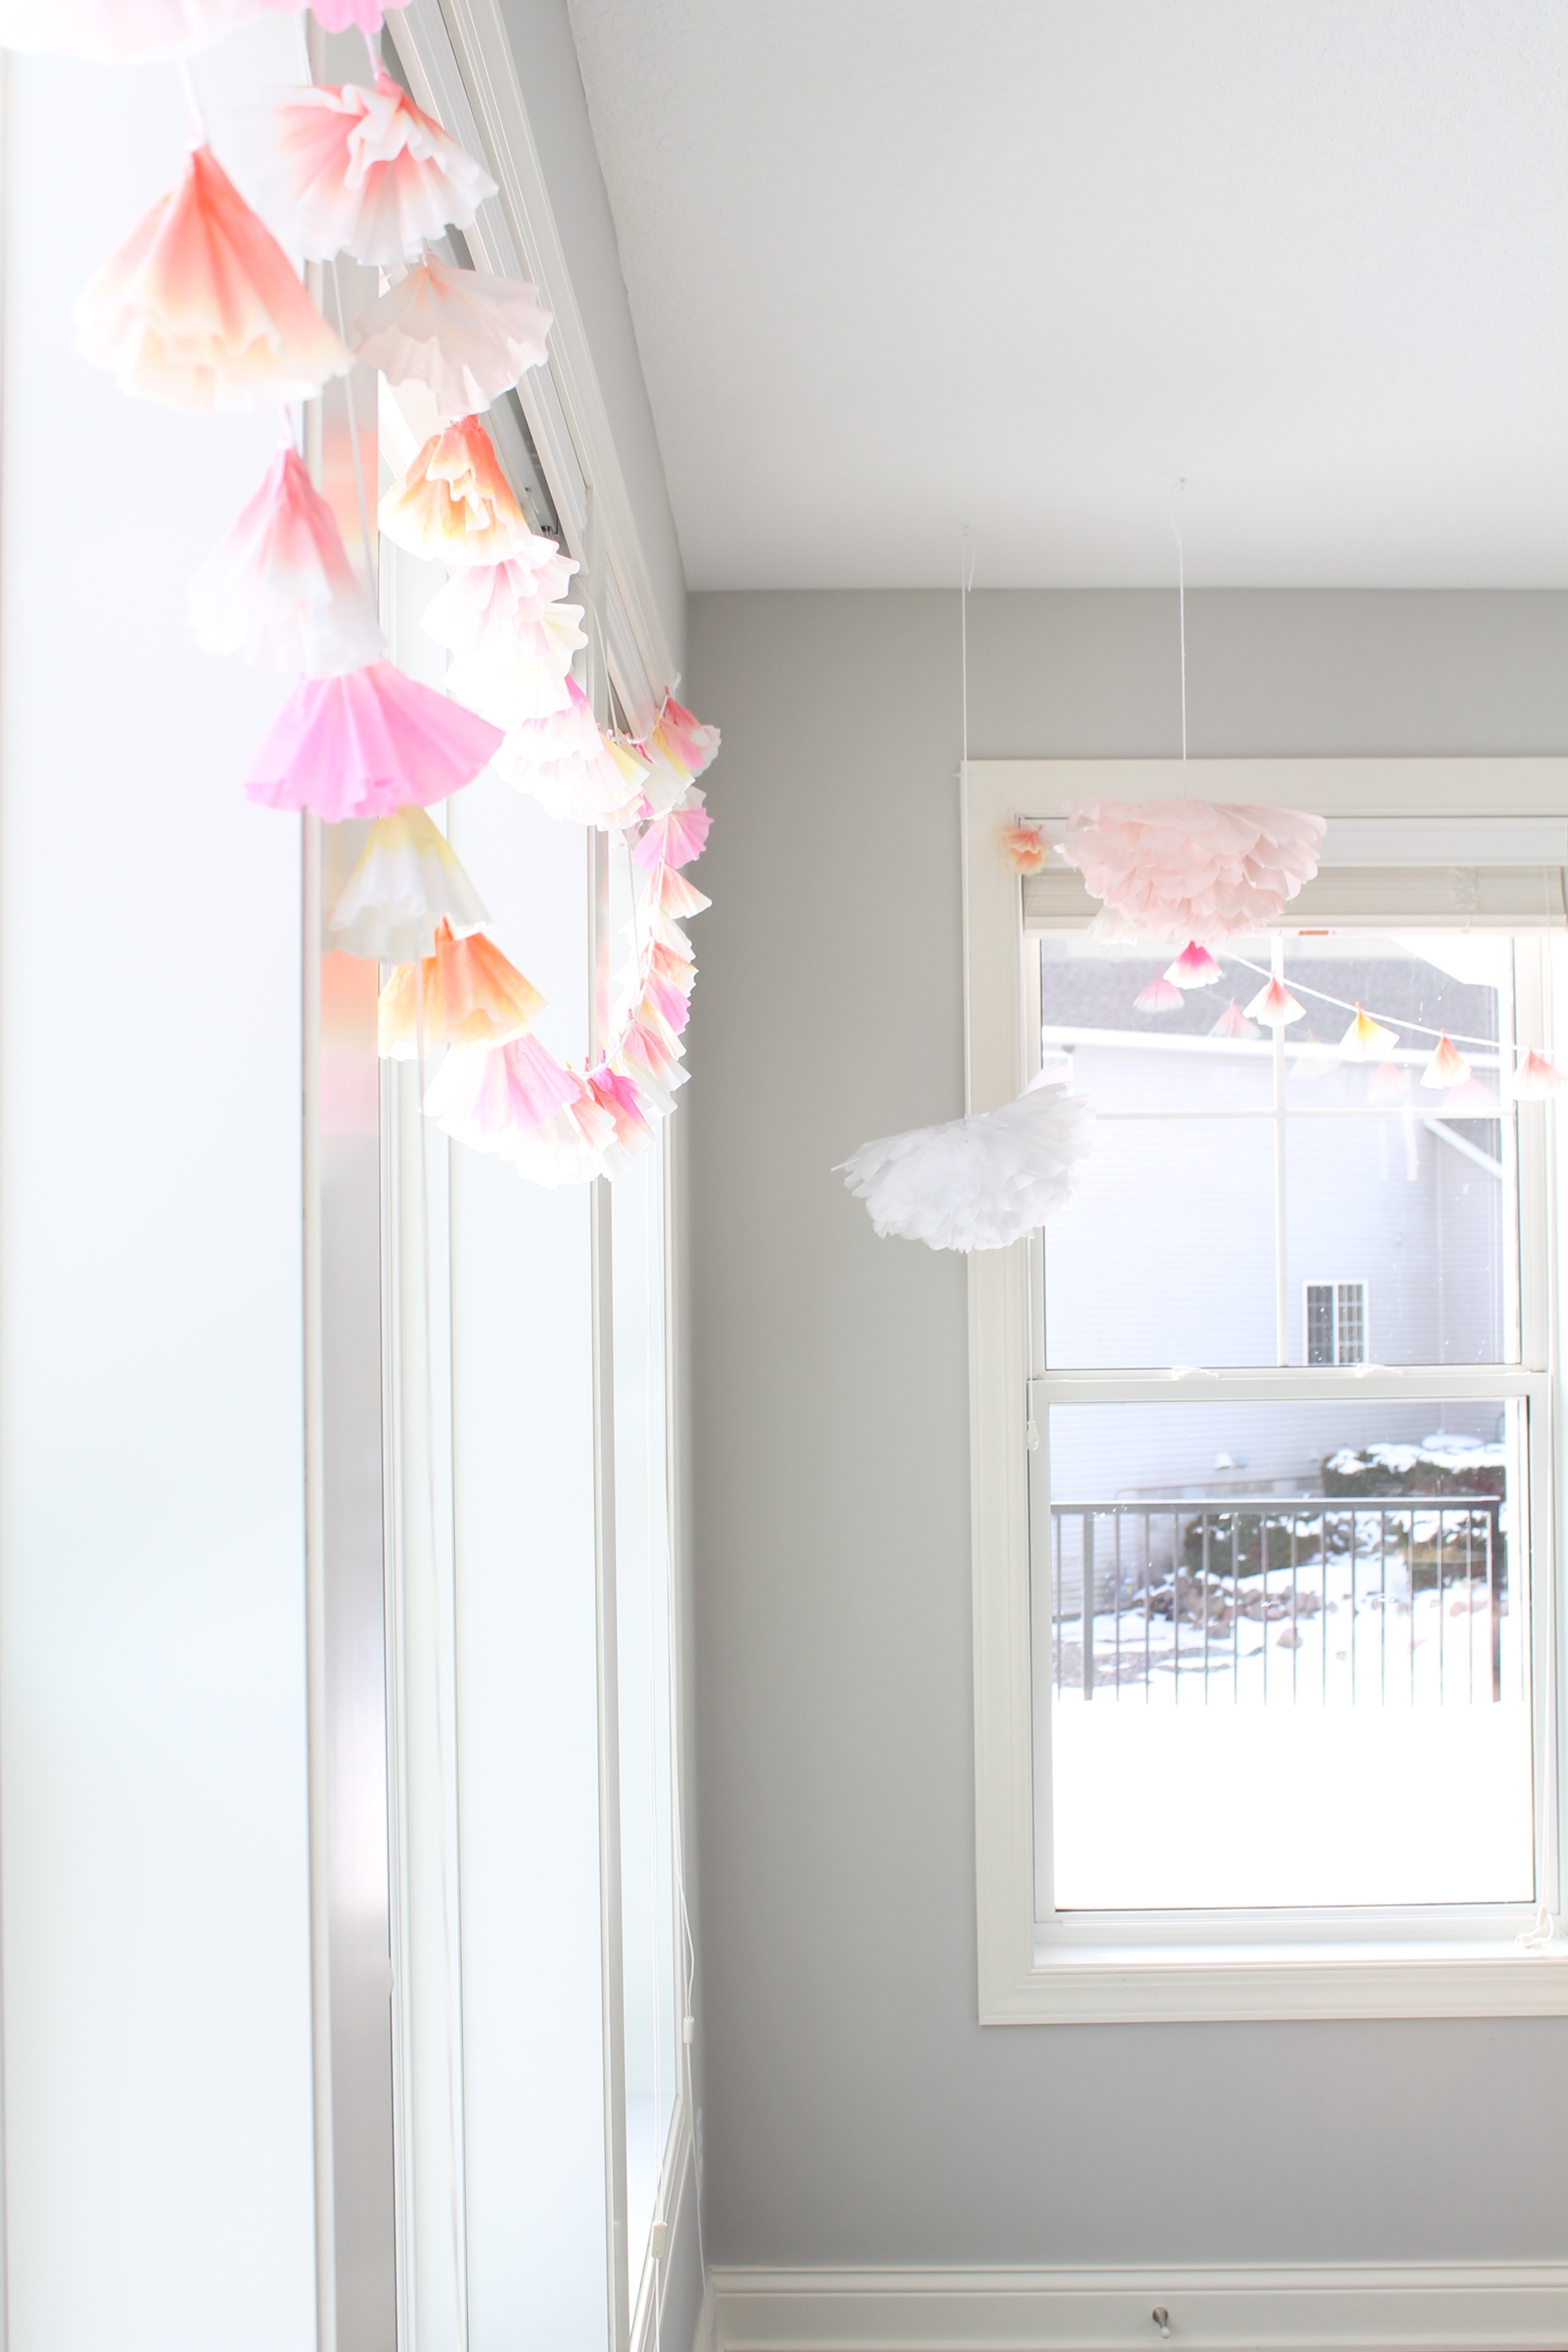 Coffee Filter garland and giant tissue paper flowers for the perfect garden tea party.